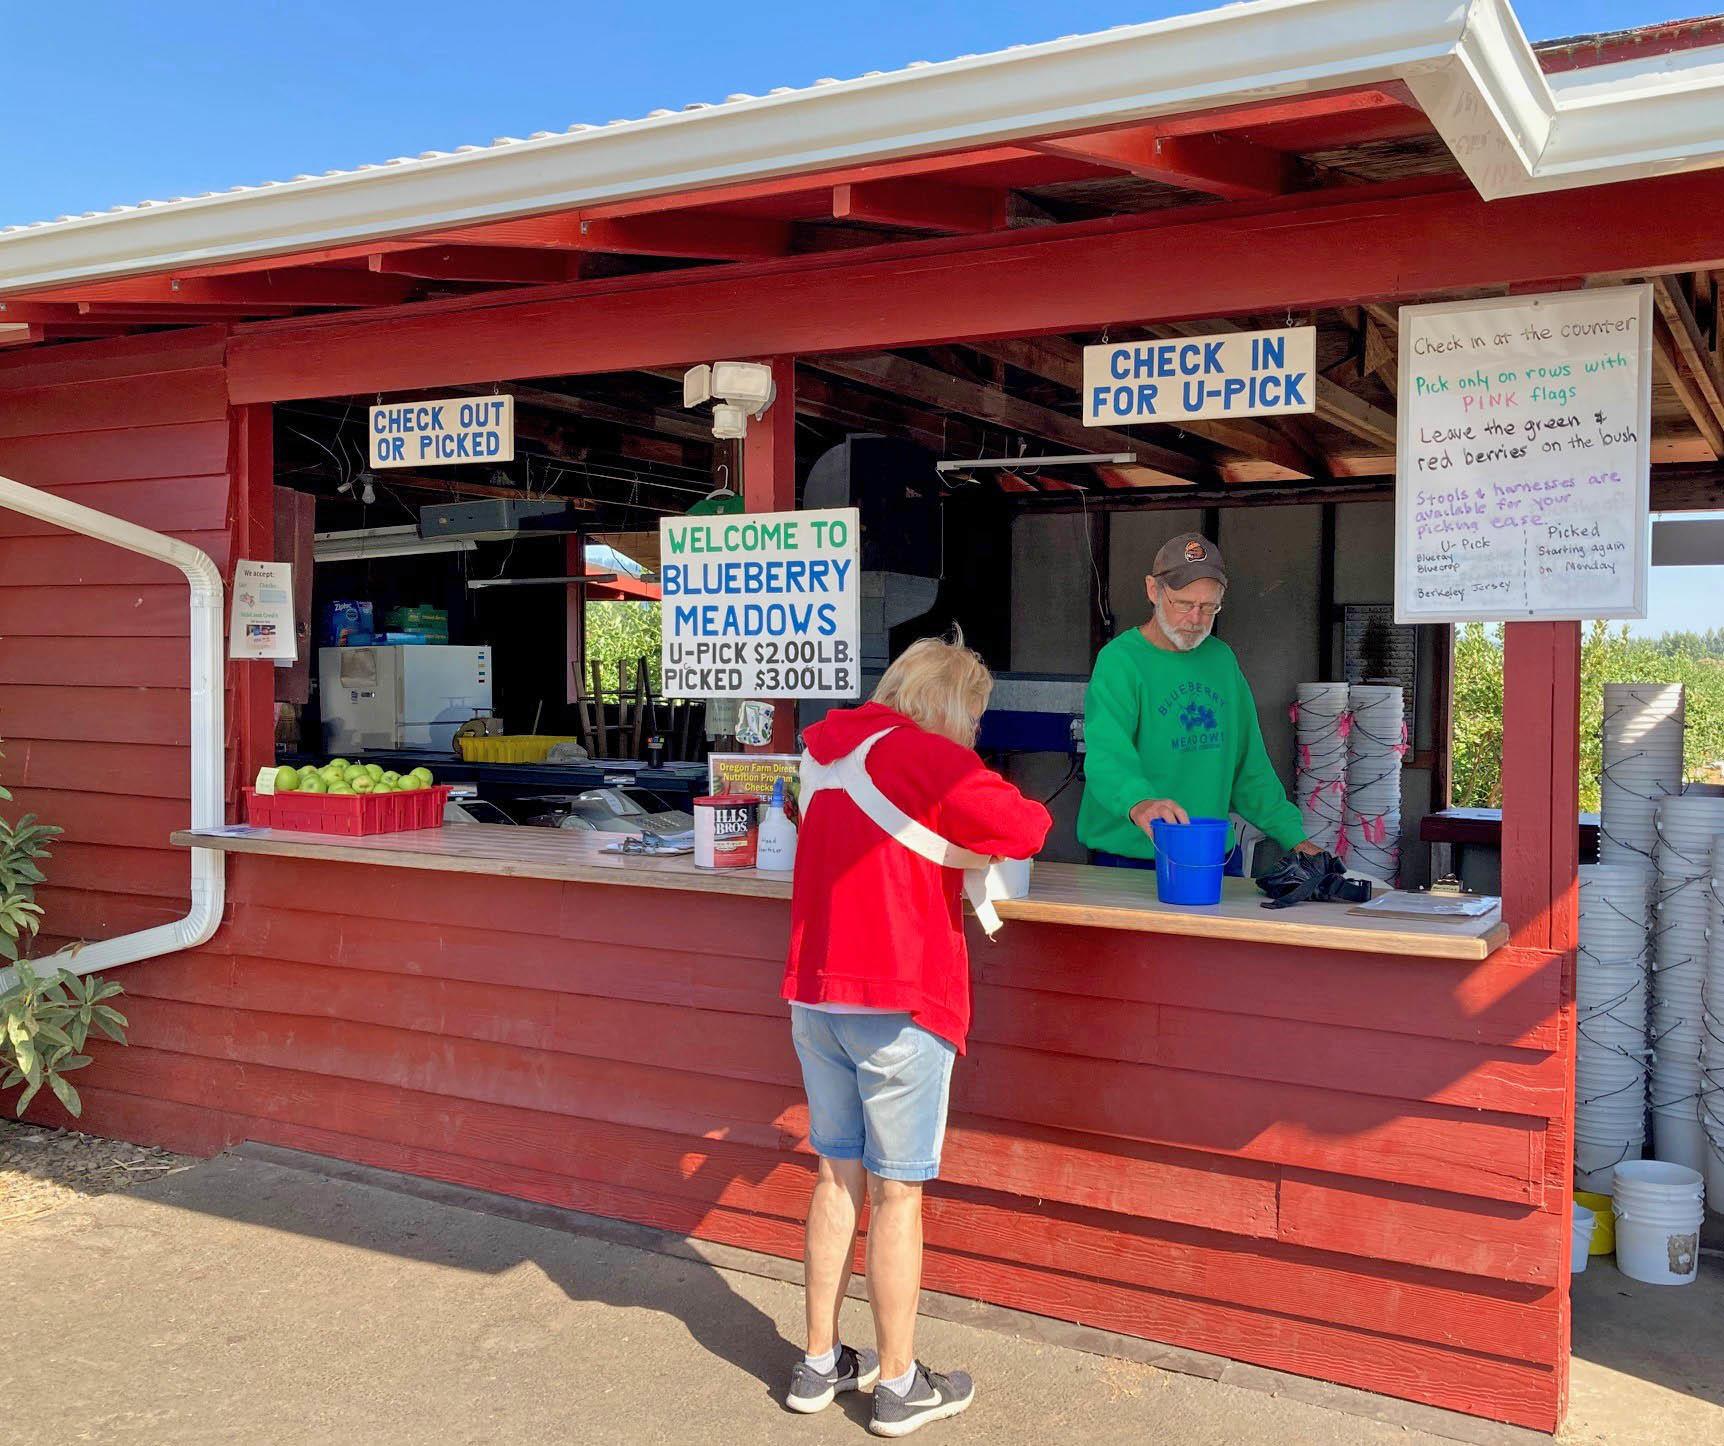 a woman completes a transaction at a little red u-pick blueberry stand.